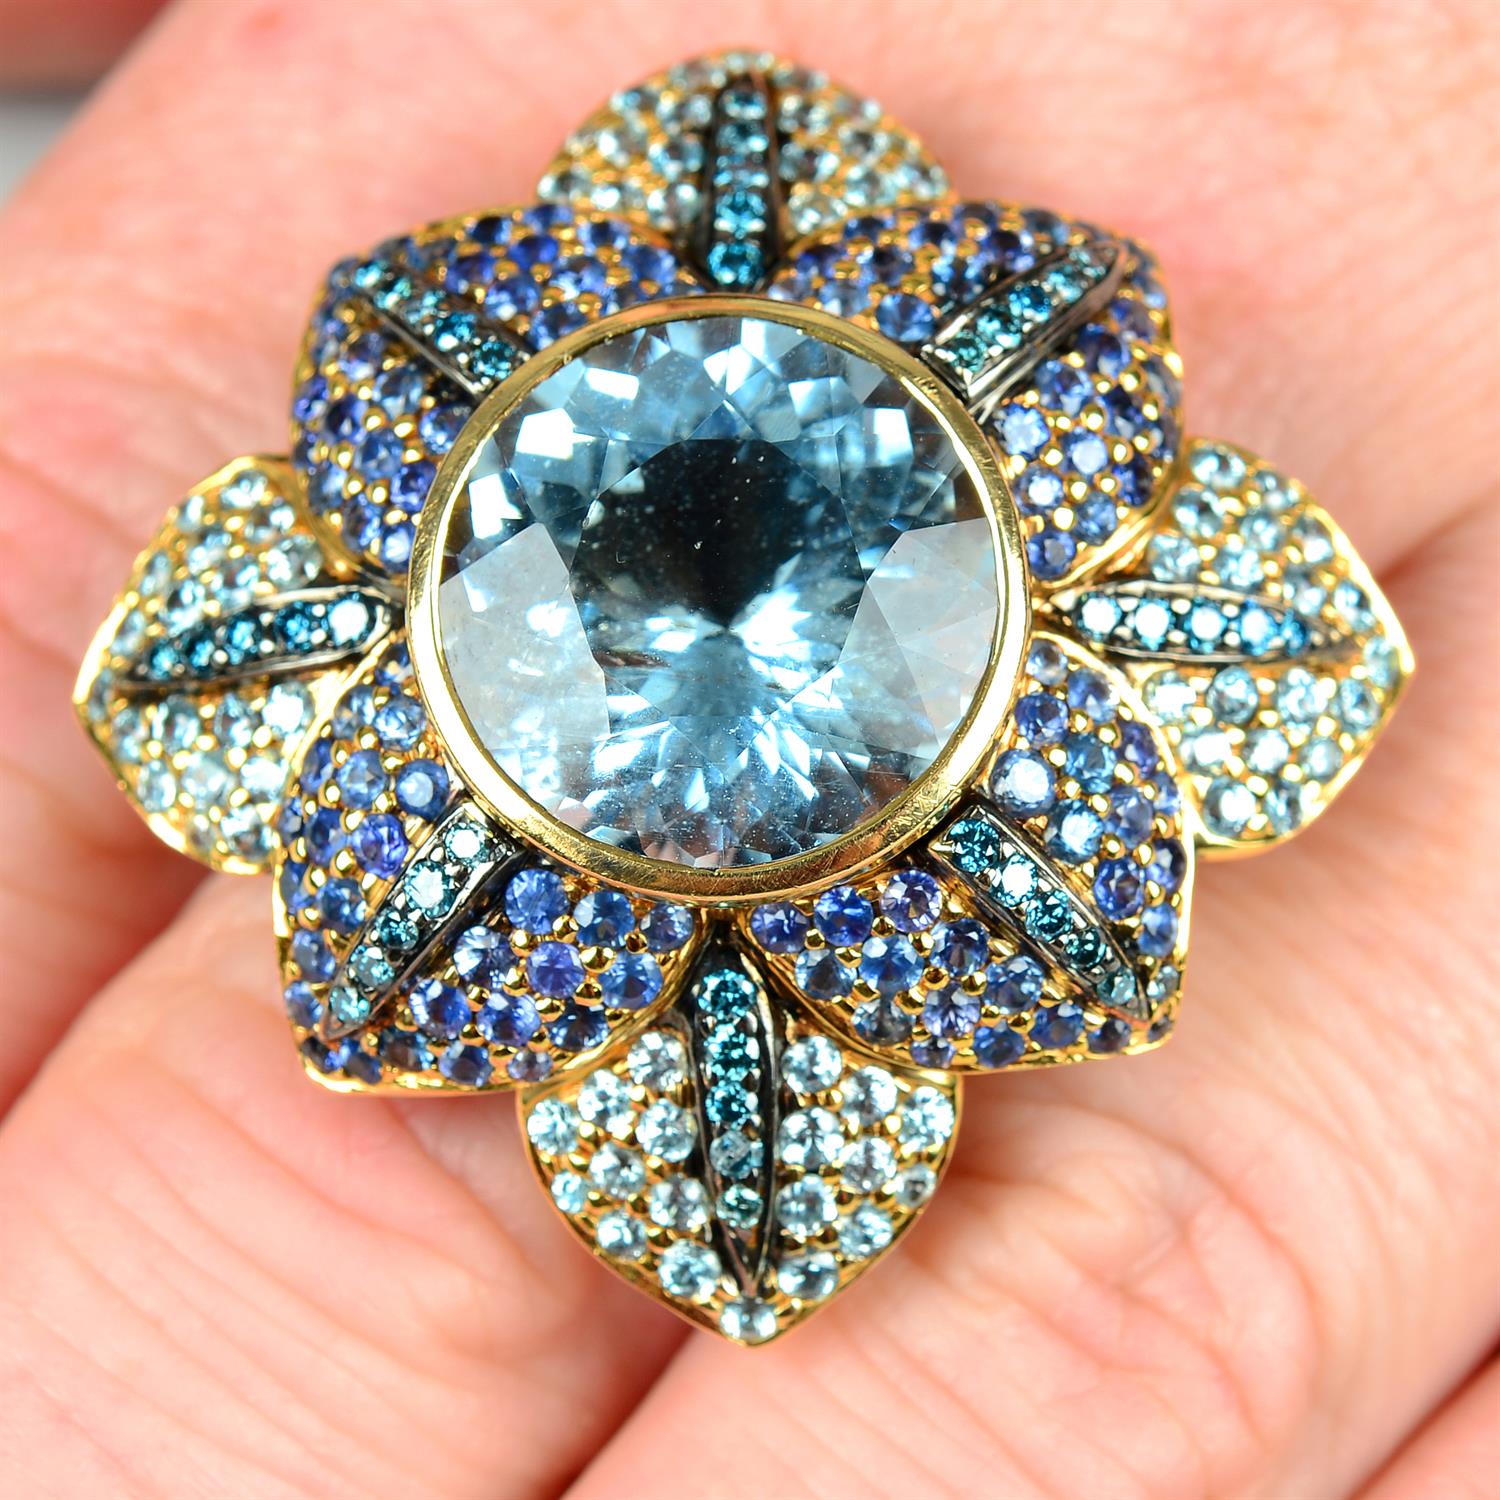 An aquamarine, sapphire and colour-treated 'blue' diamond floral ring, by Zorab Creations.